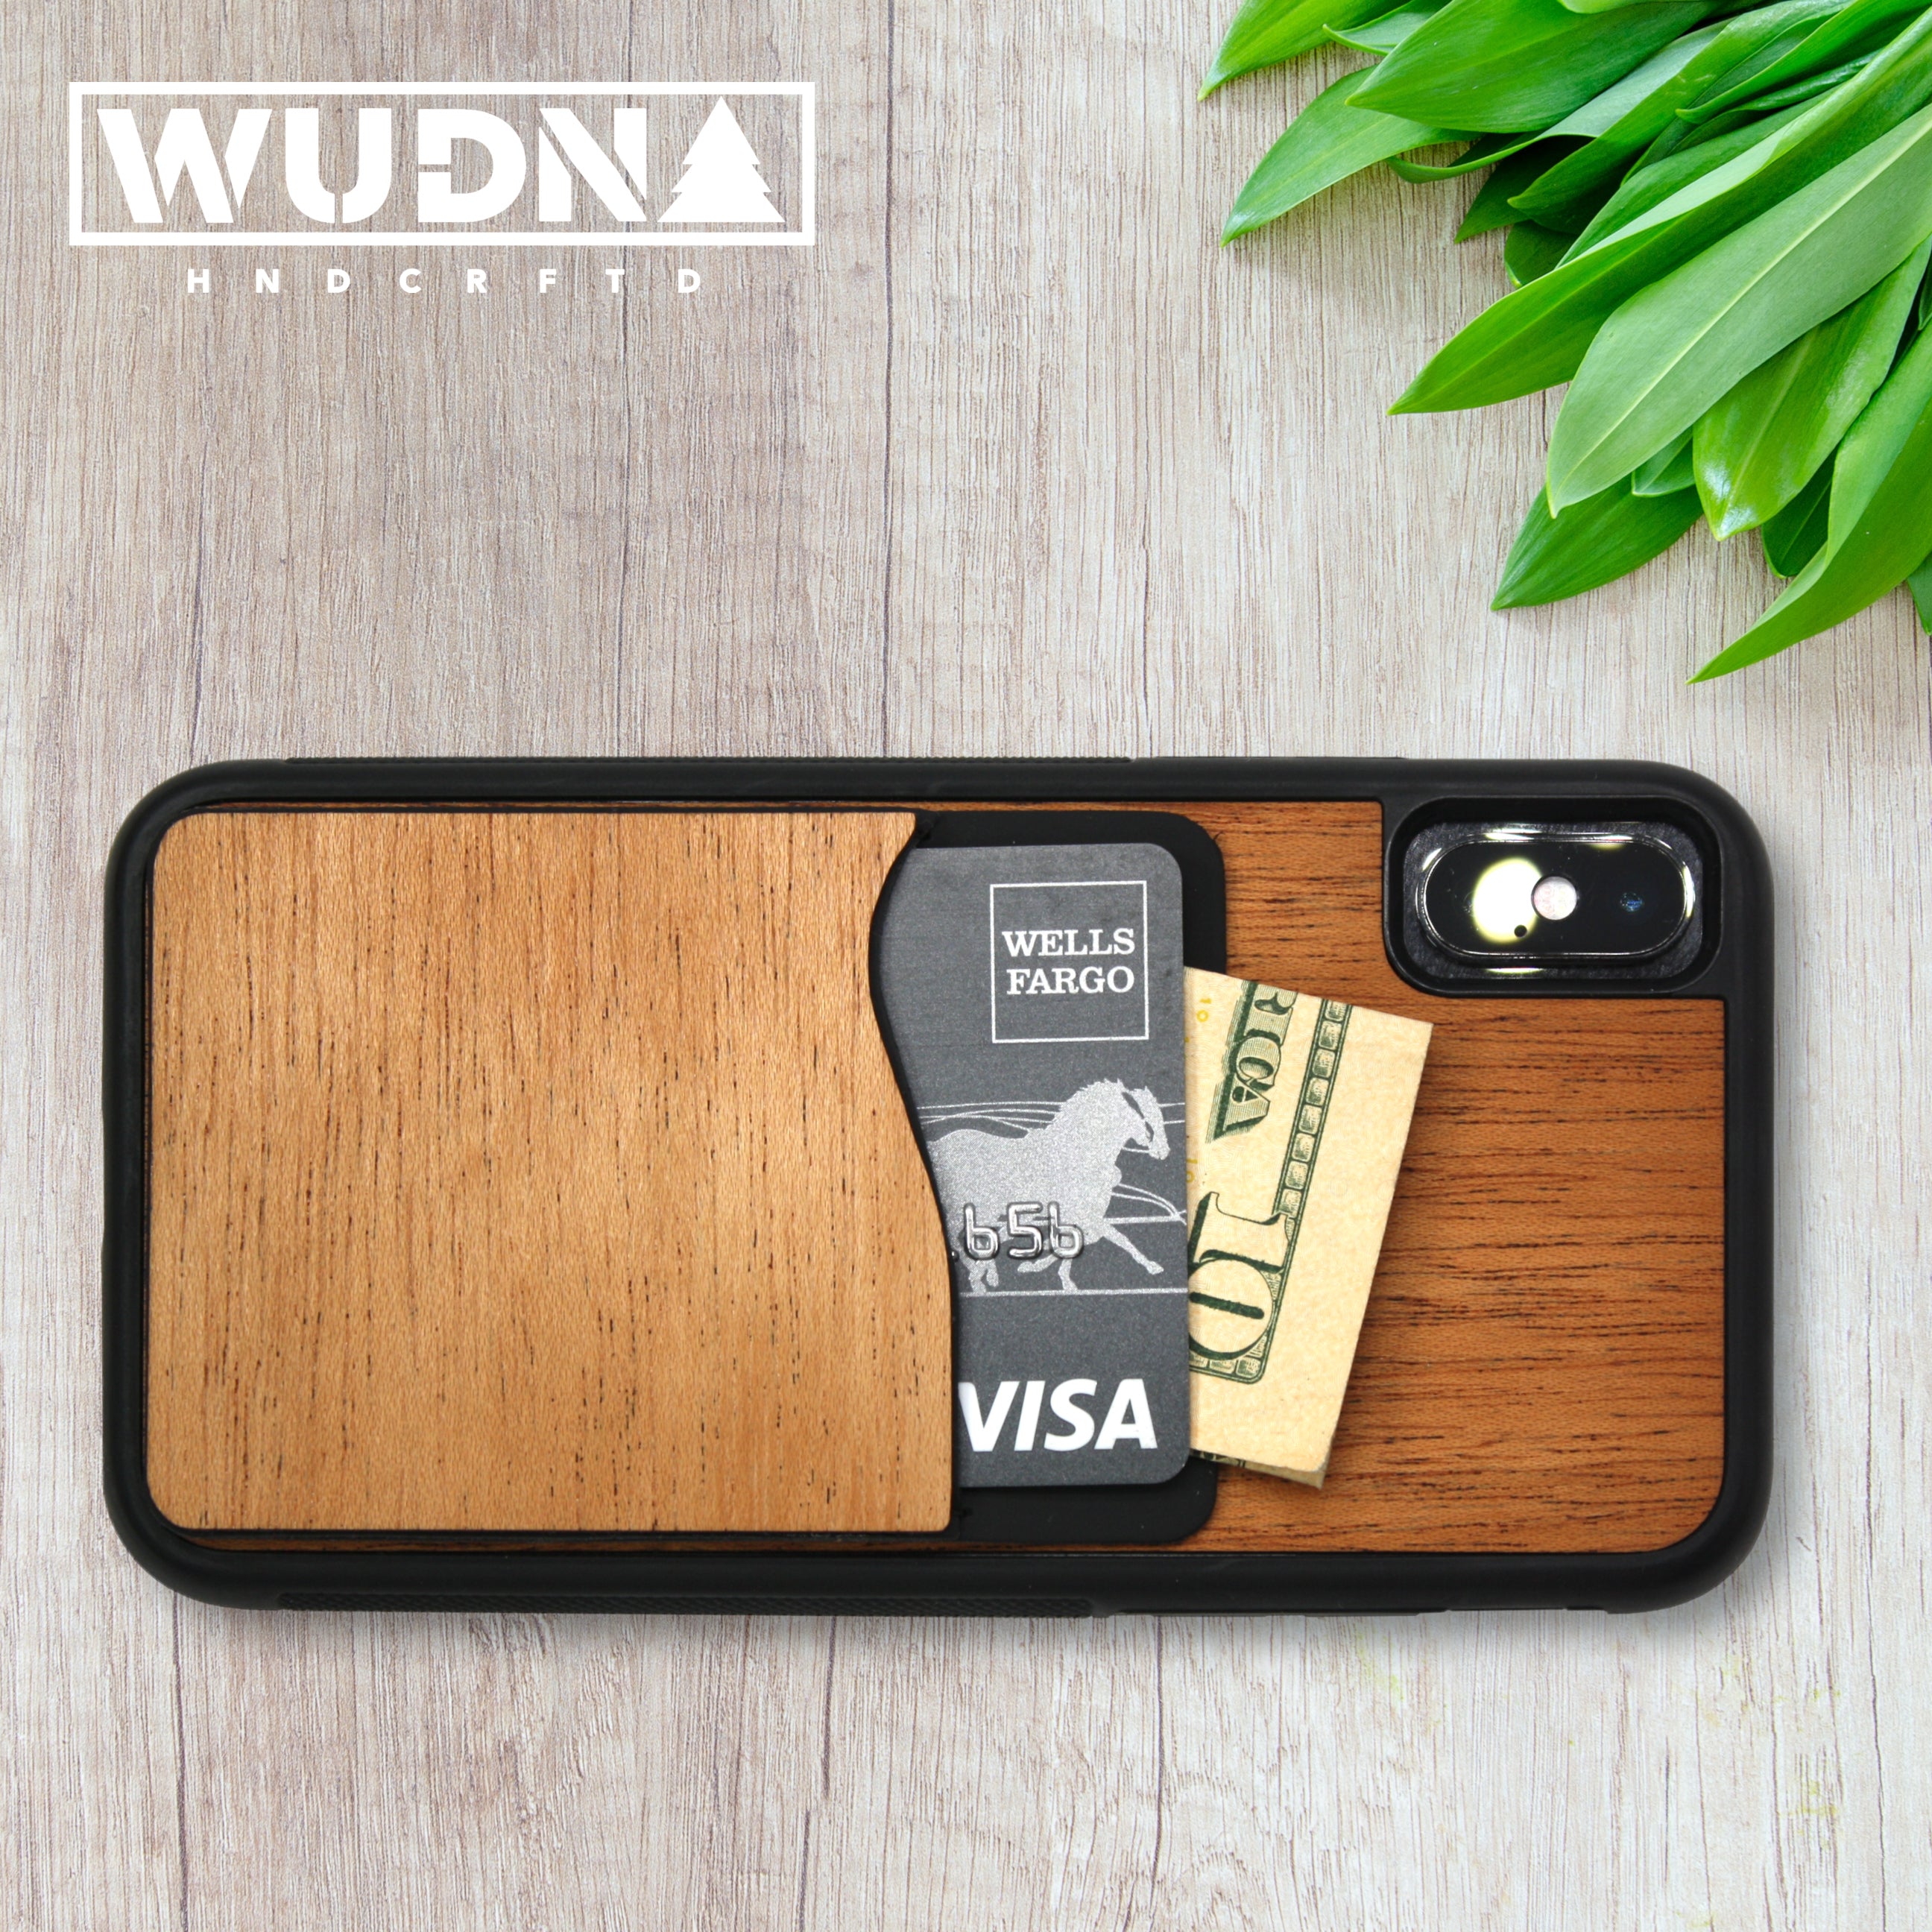 WUDN Wooden Business Card Holder Wallet, Holds 20 Cards, Built with Stainless Steel and Real Wood - Sawtooth Mountains Bamboo